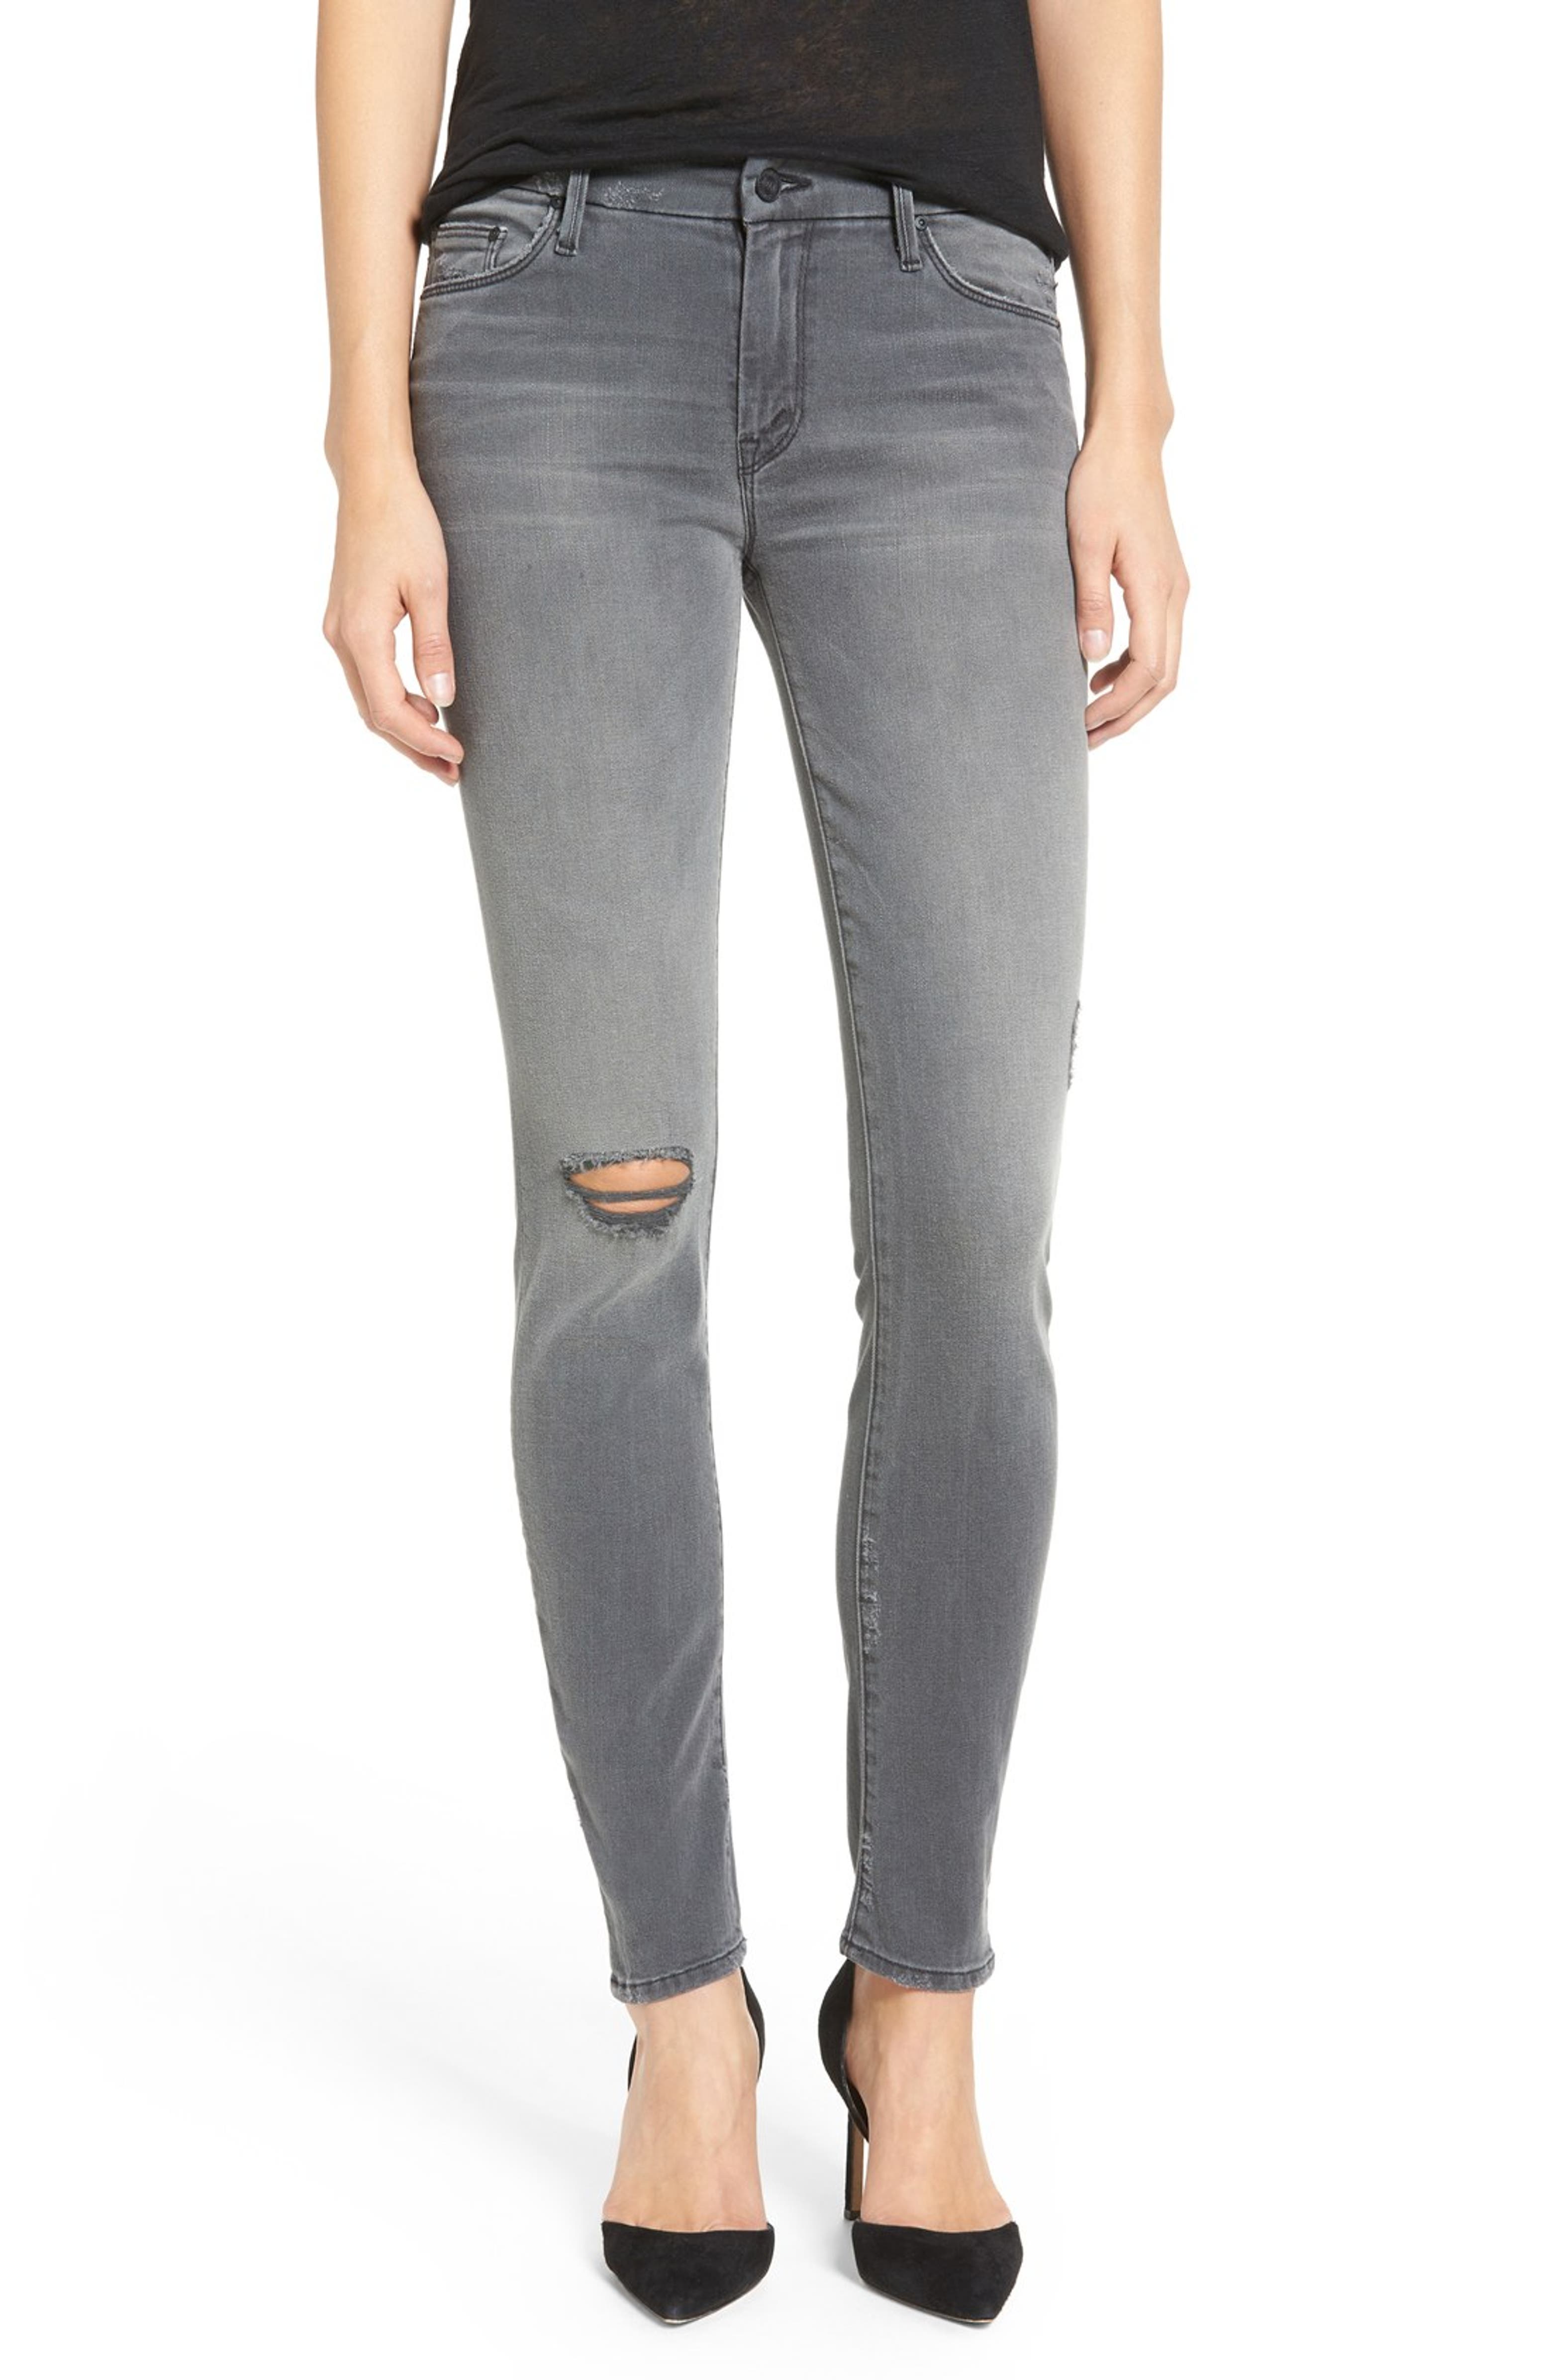 MOTHER The Looker Ripped Skinny Jeans (Last Chance Saloon) | Nordstrom